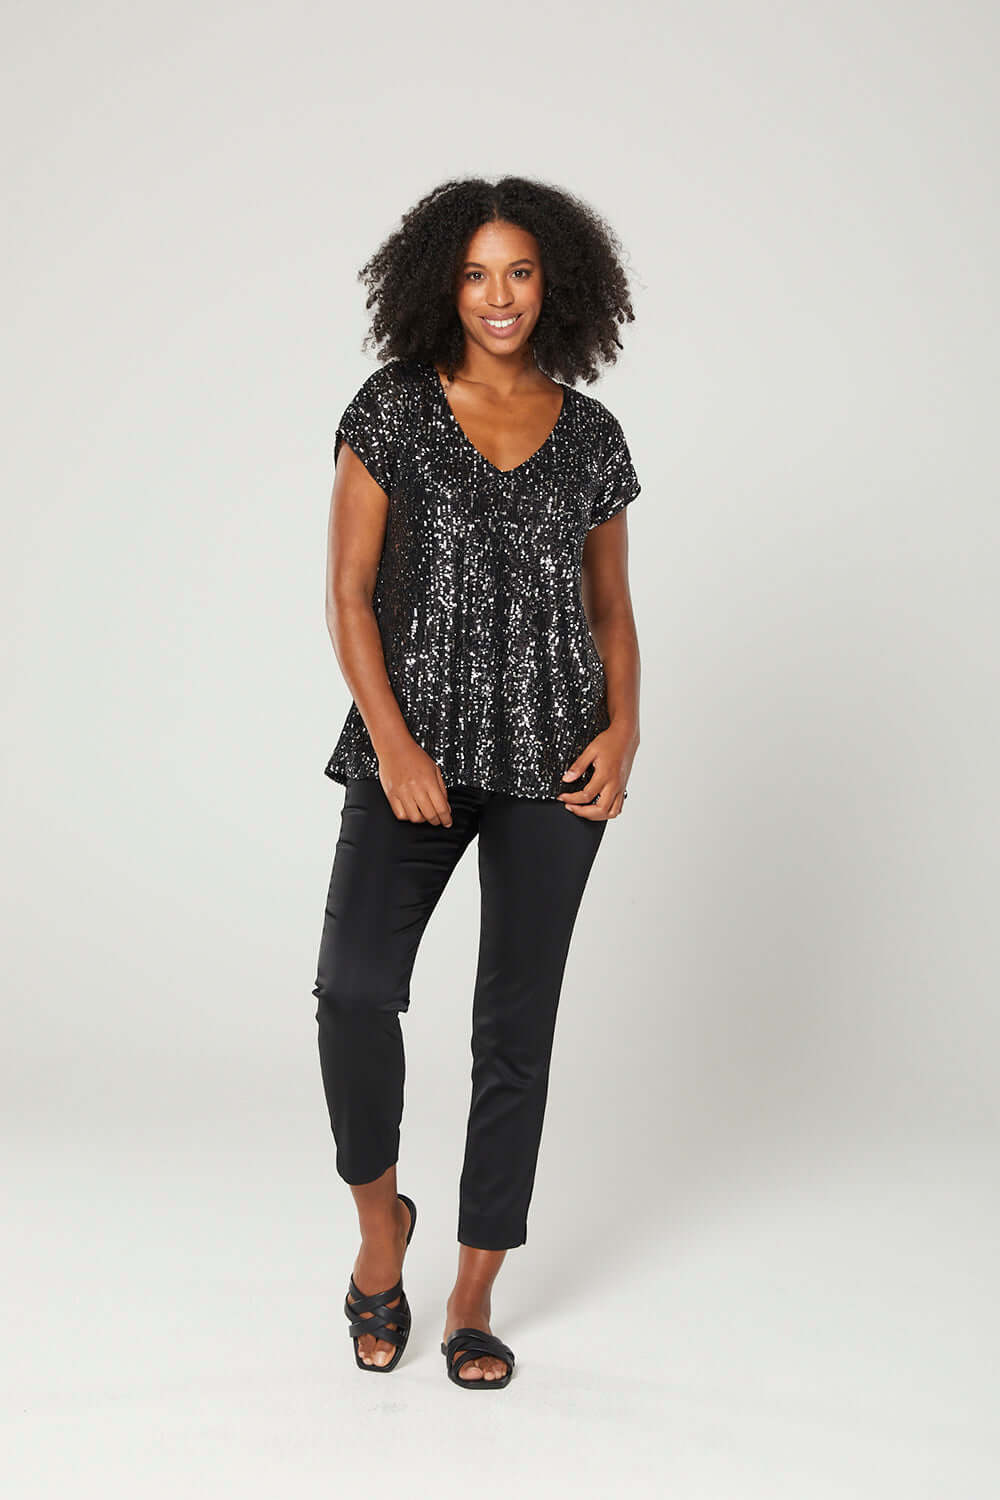 Oprah's Favorite Spanx Pants Are 25% Off at Zappos